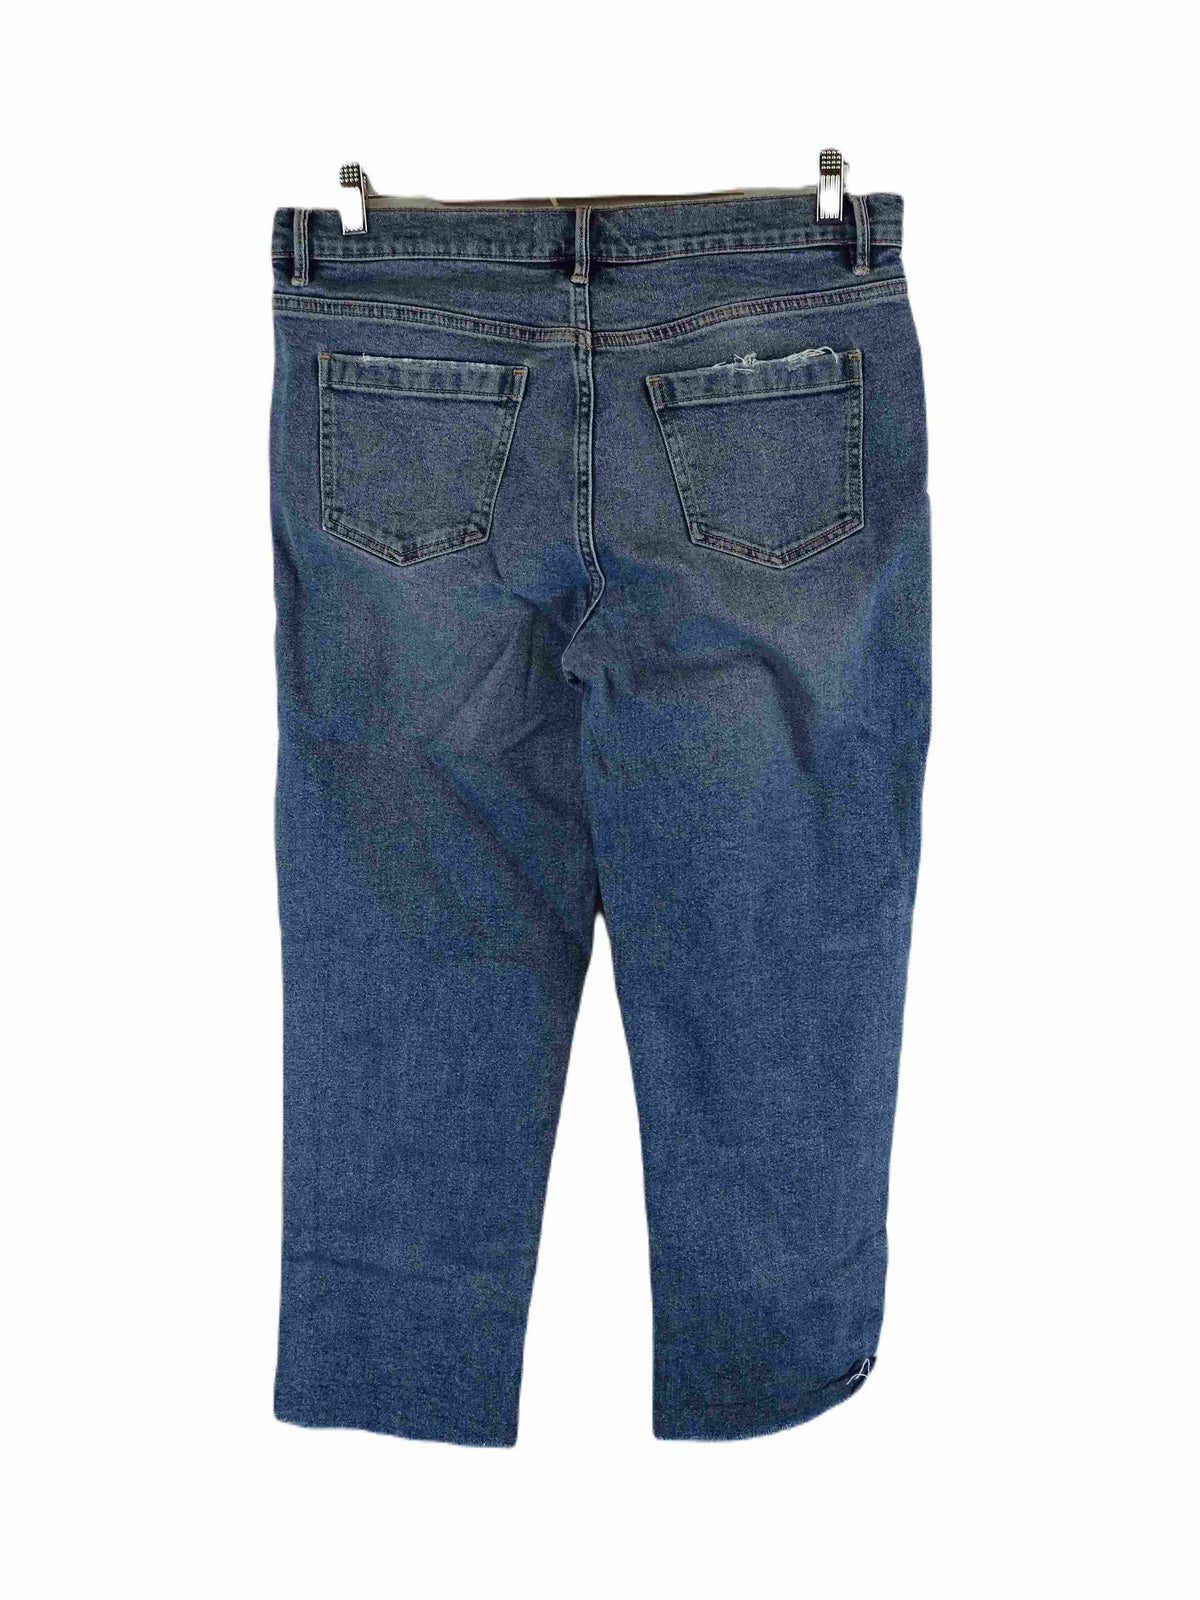 Country Road Denim Jeans 12